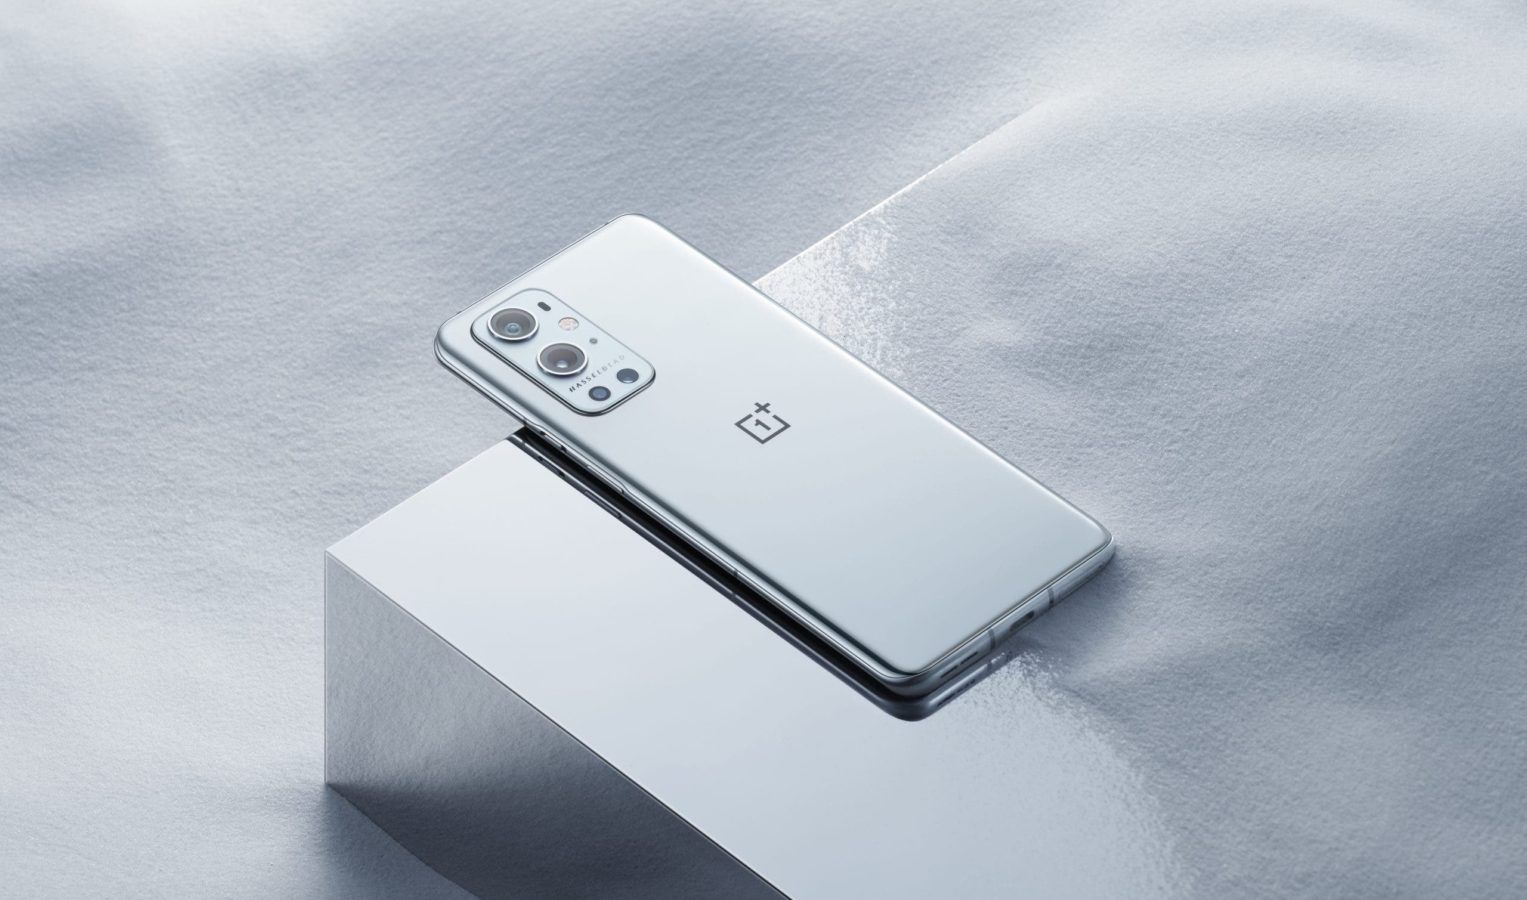 The OnePlus 9 Pro: The David amongst Goliaths